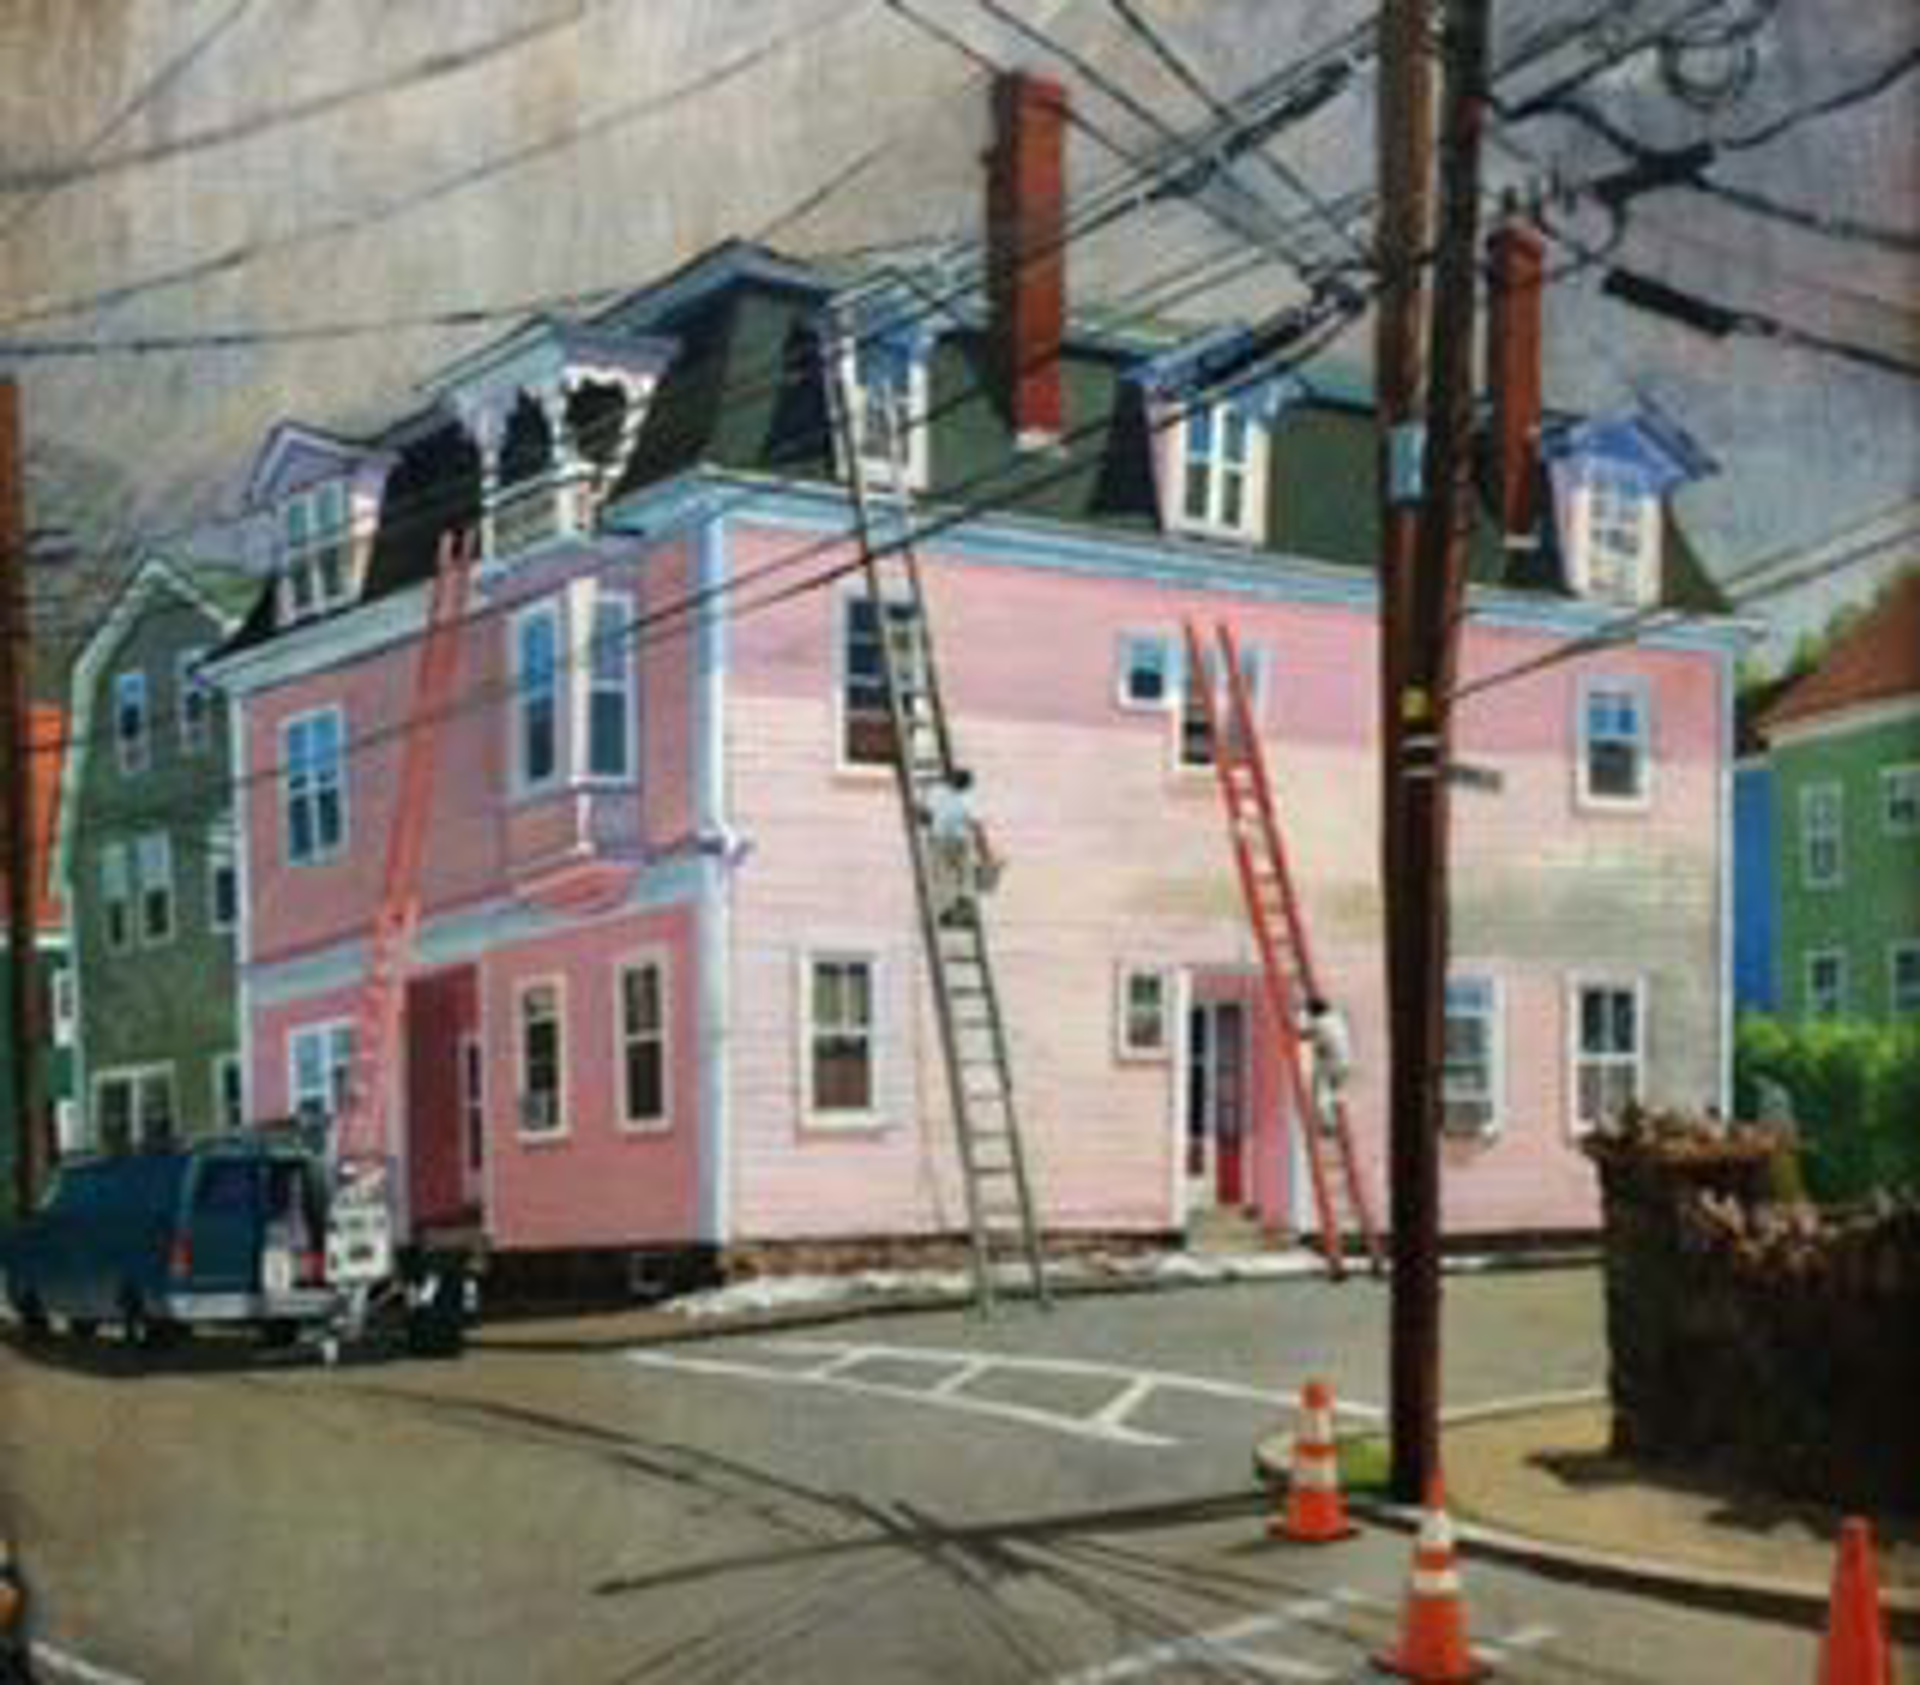 Crossroads: The Pink House by Christine Whalen-Waller